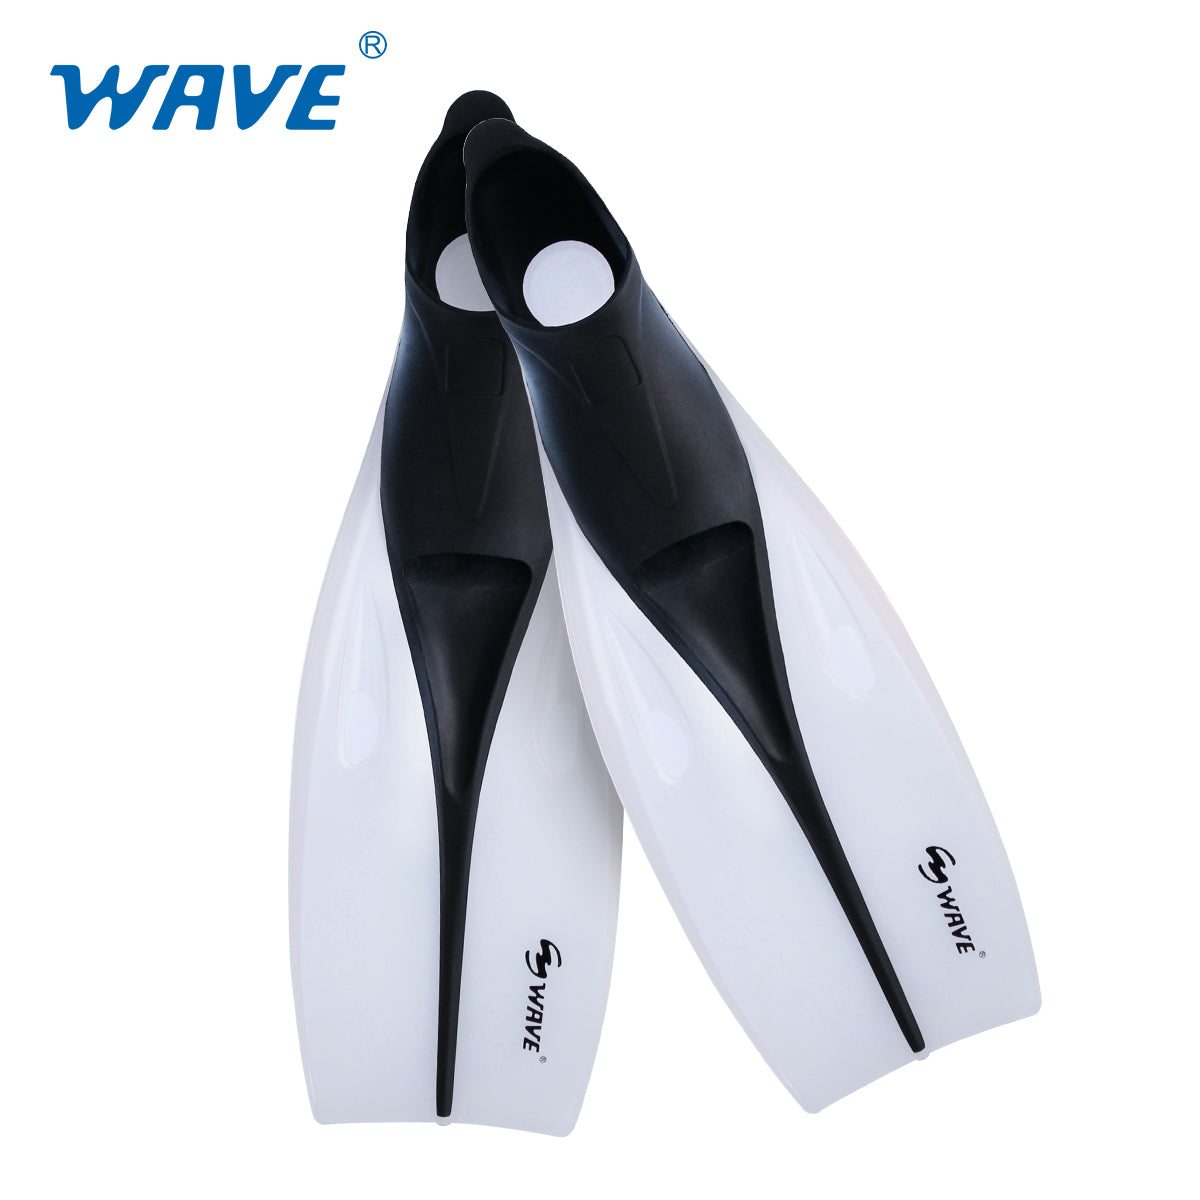 High Quality Adjustable BEST Swimming Fins and Freediving Snorkeling Gear Filppers